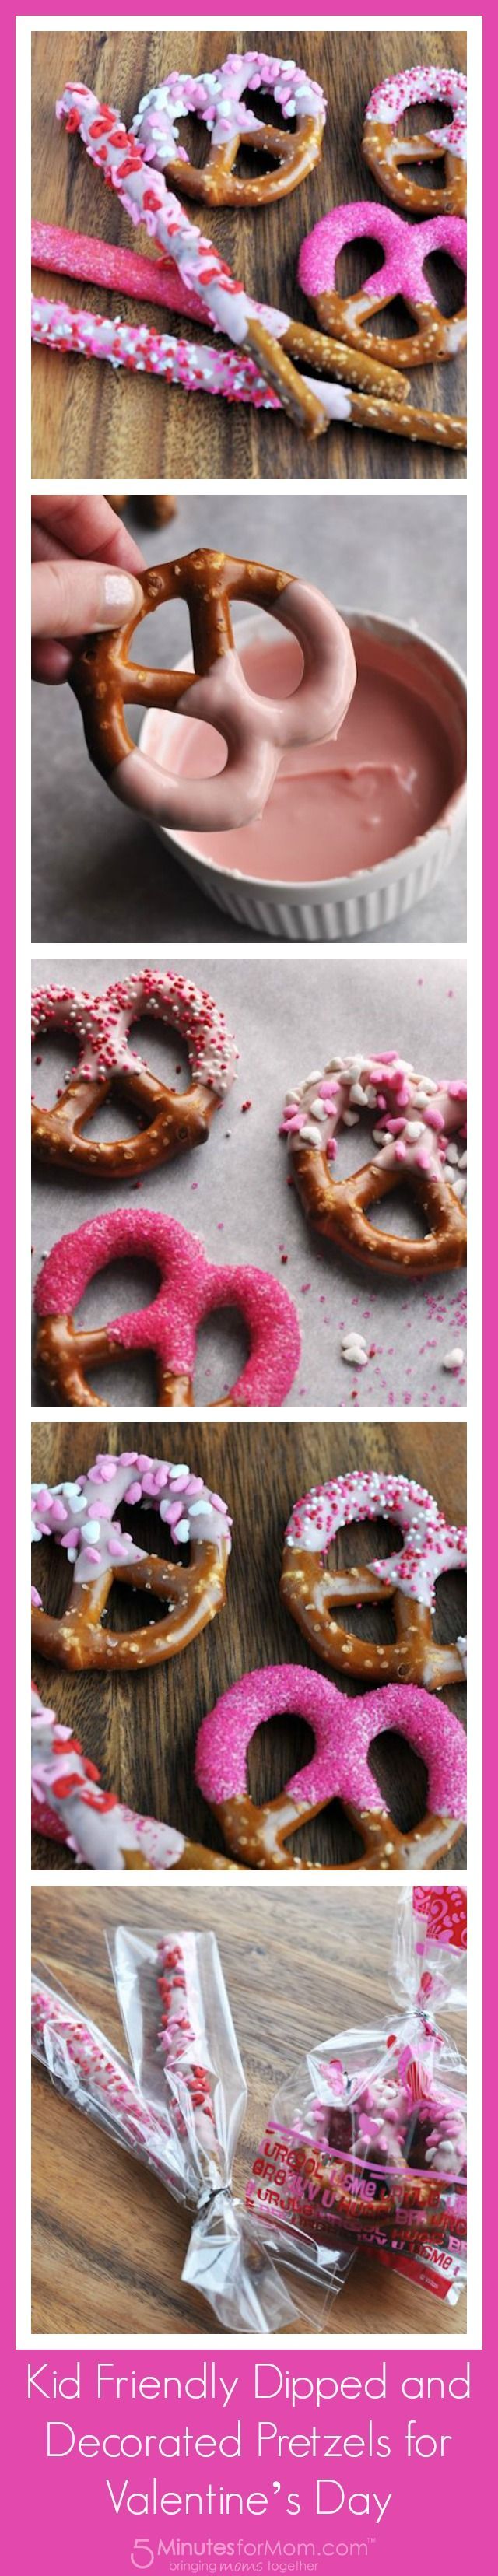 Kid Friendly Dipped and Decorated Pretzels for Valentine’s Day